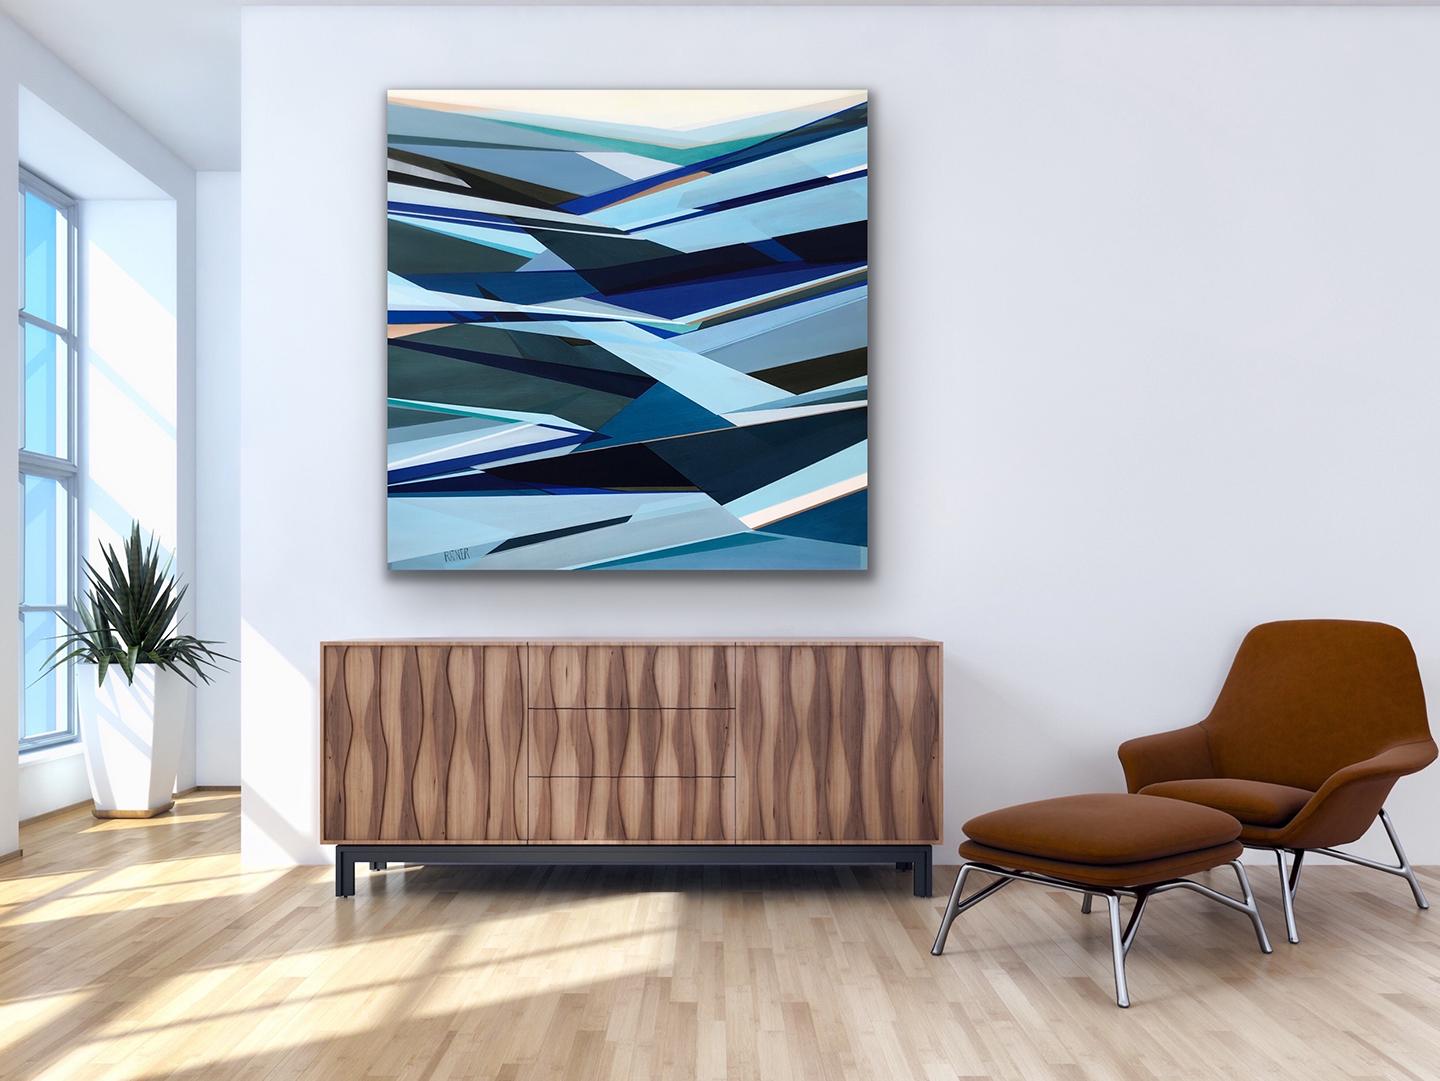 'Fathomless' Large contemporary abstract geometric painting - Abstract Geometric Painting by Shilo Ratner